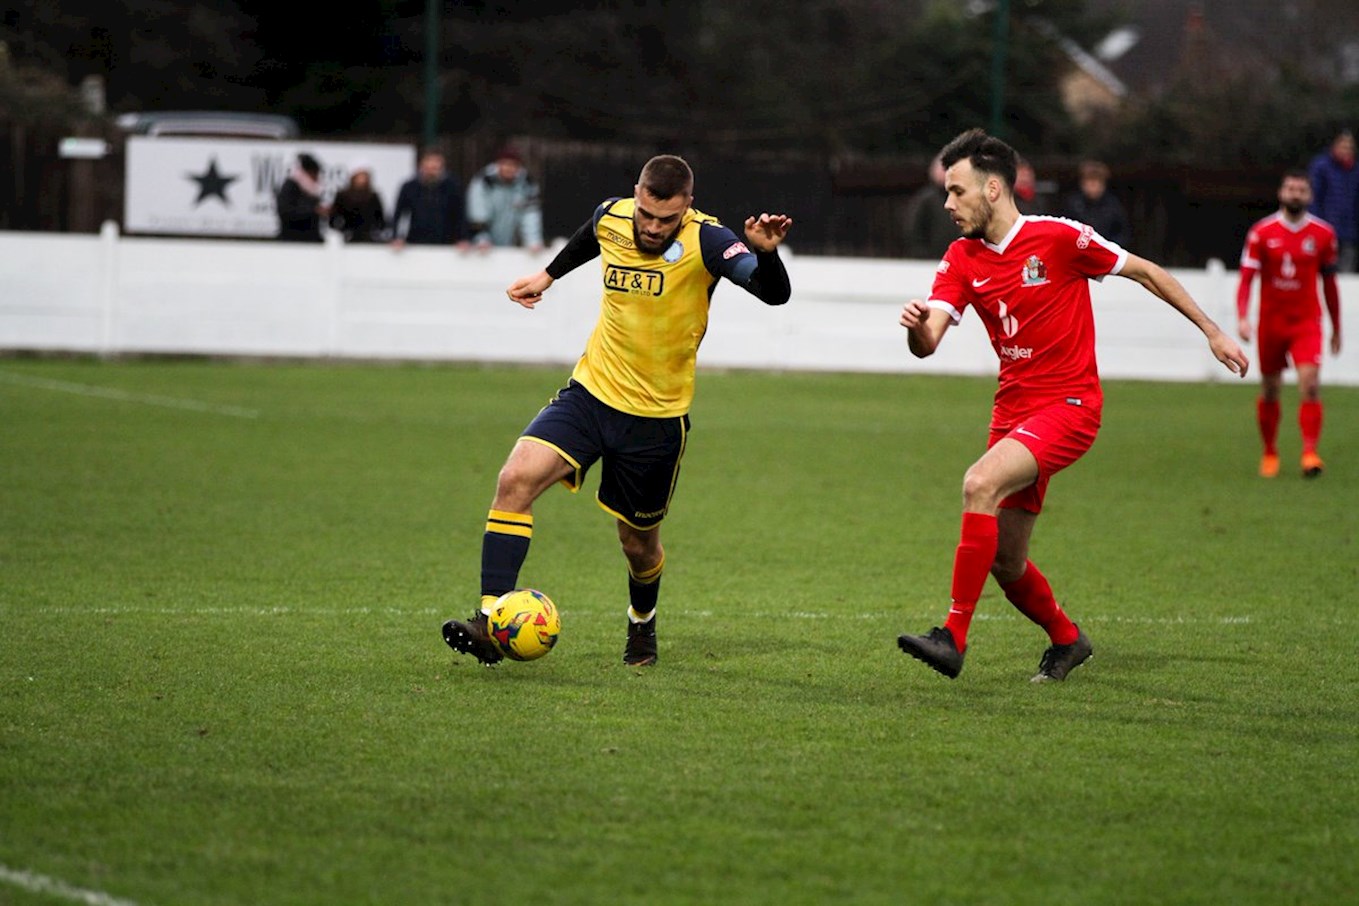 Picture courtesy of Staines Town FC.